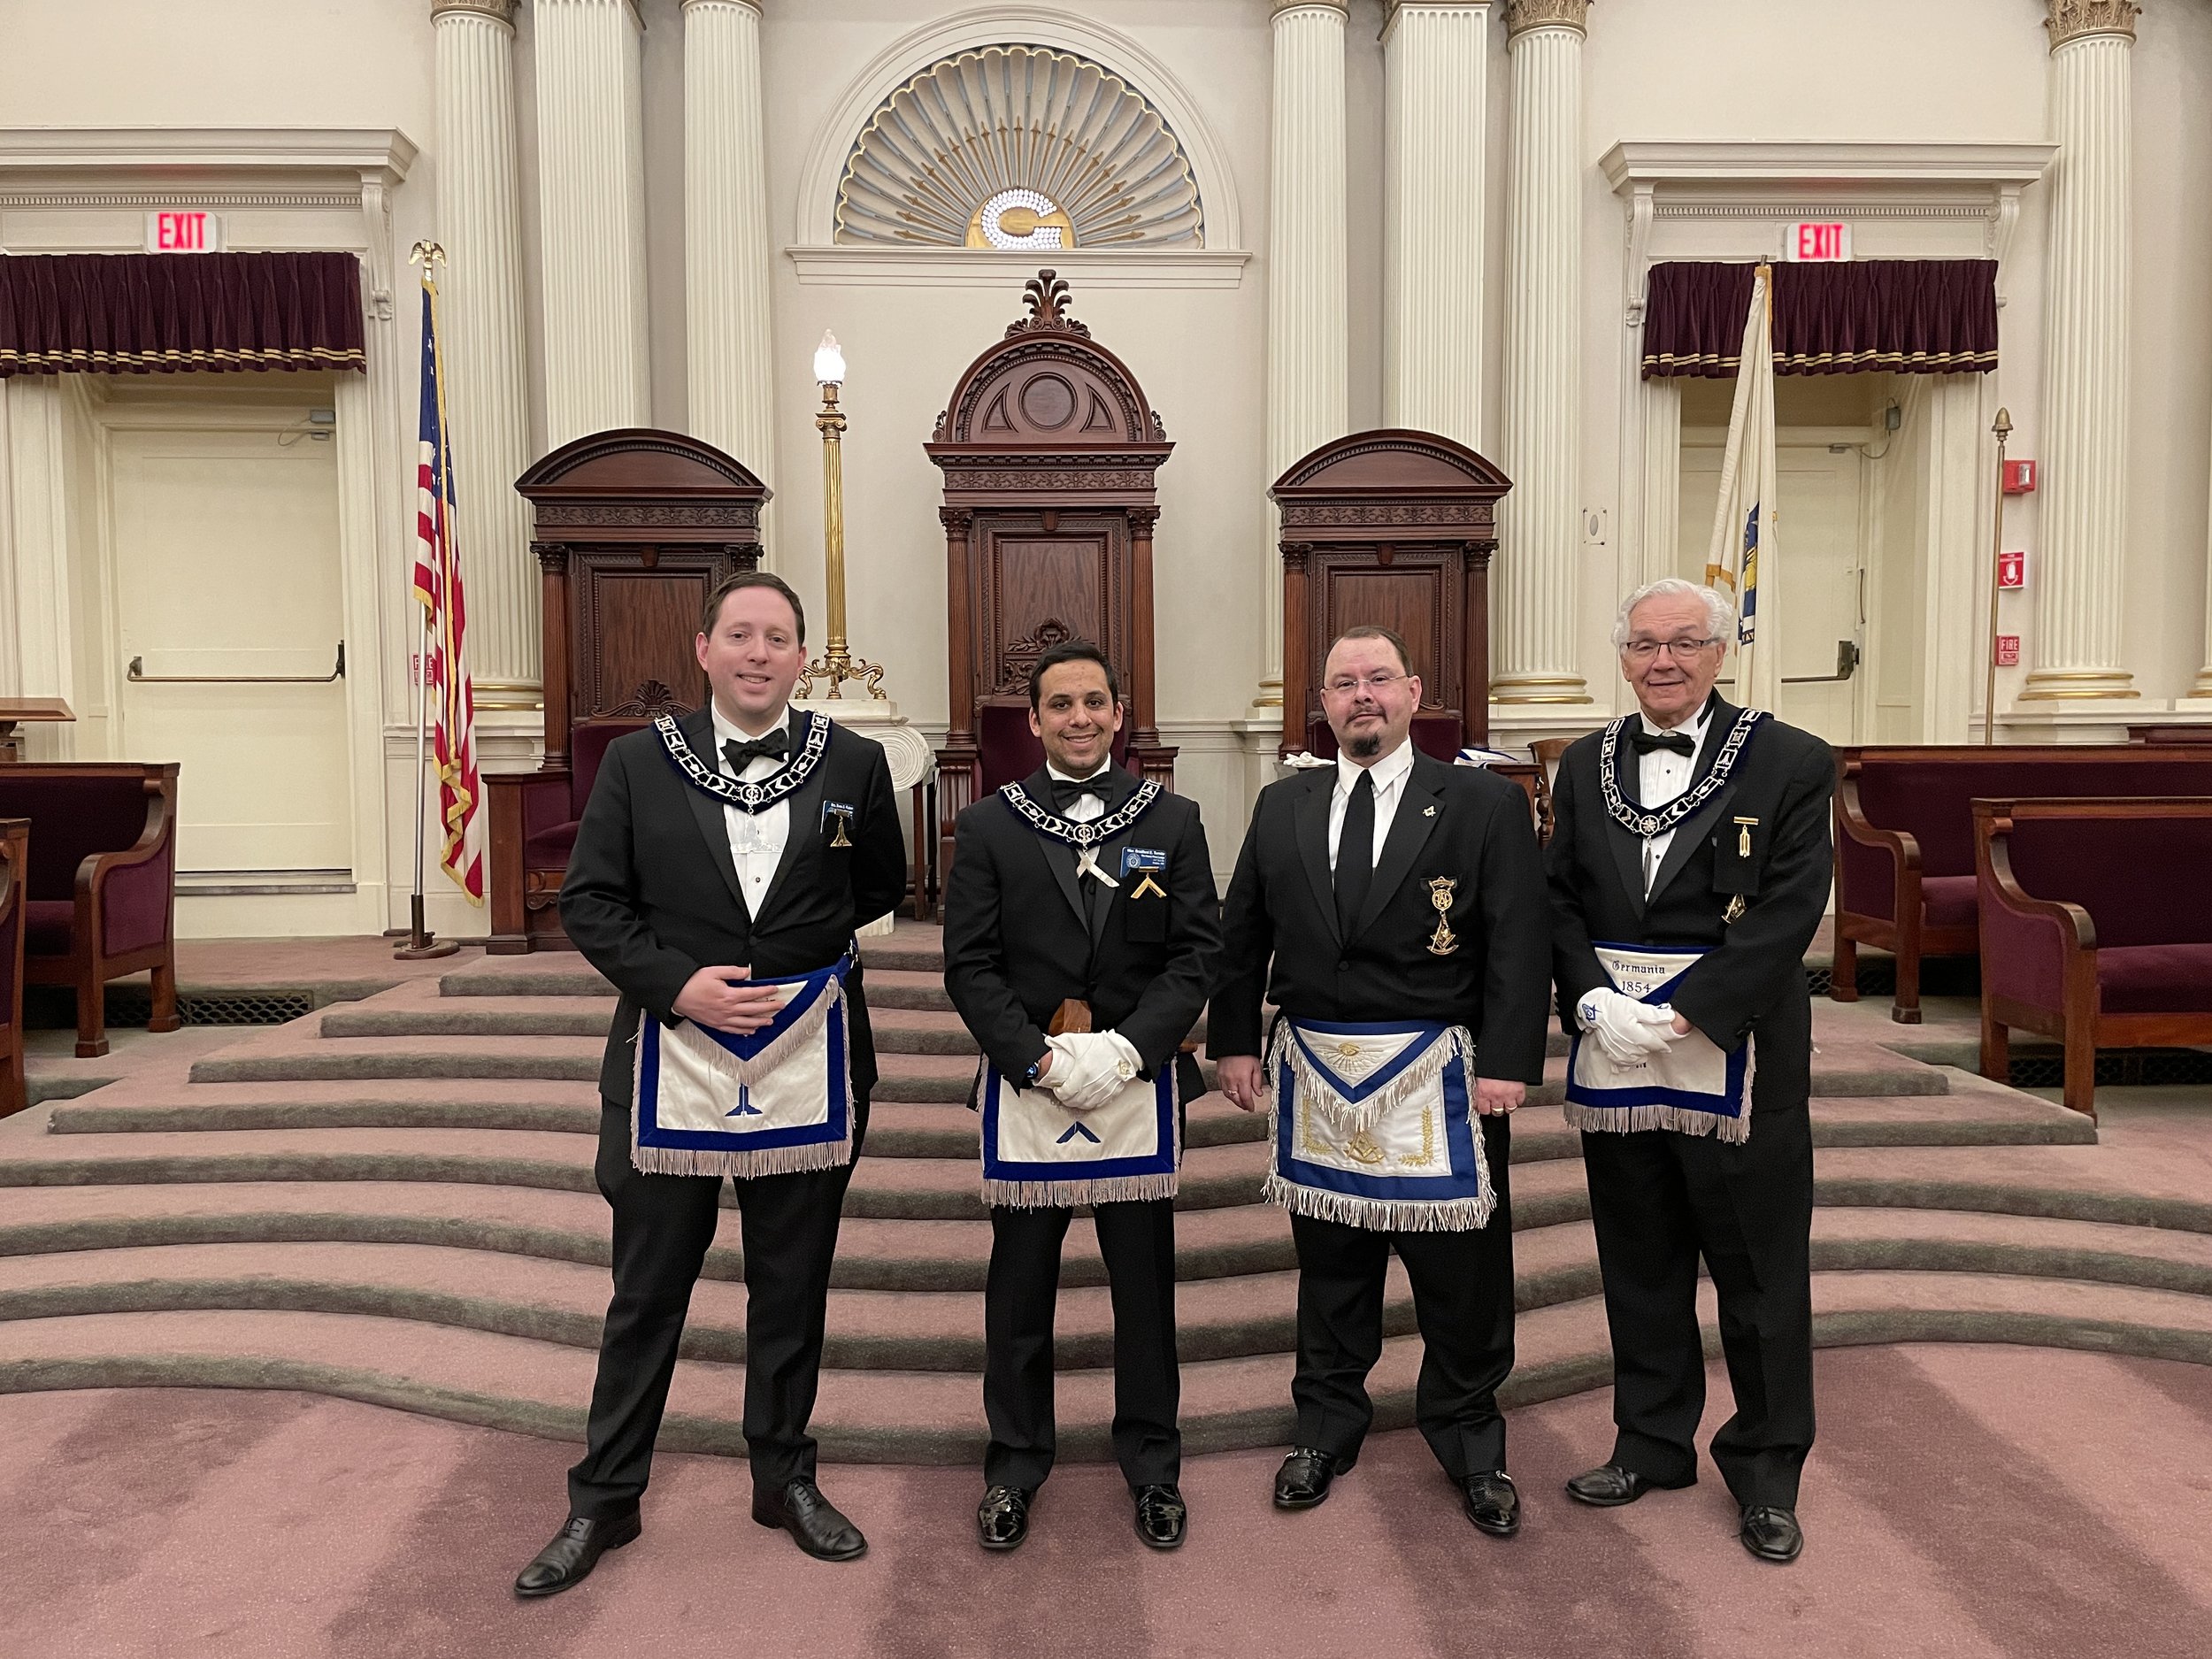  The Master and Wardens of The Henry Price Lodge  sporting the new traveling jewels gifted by Wor. Tony Nunziato 